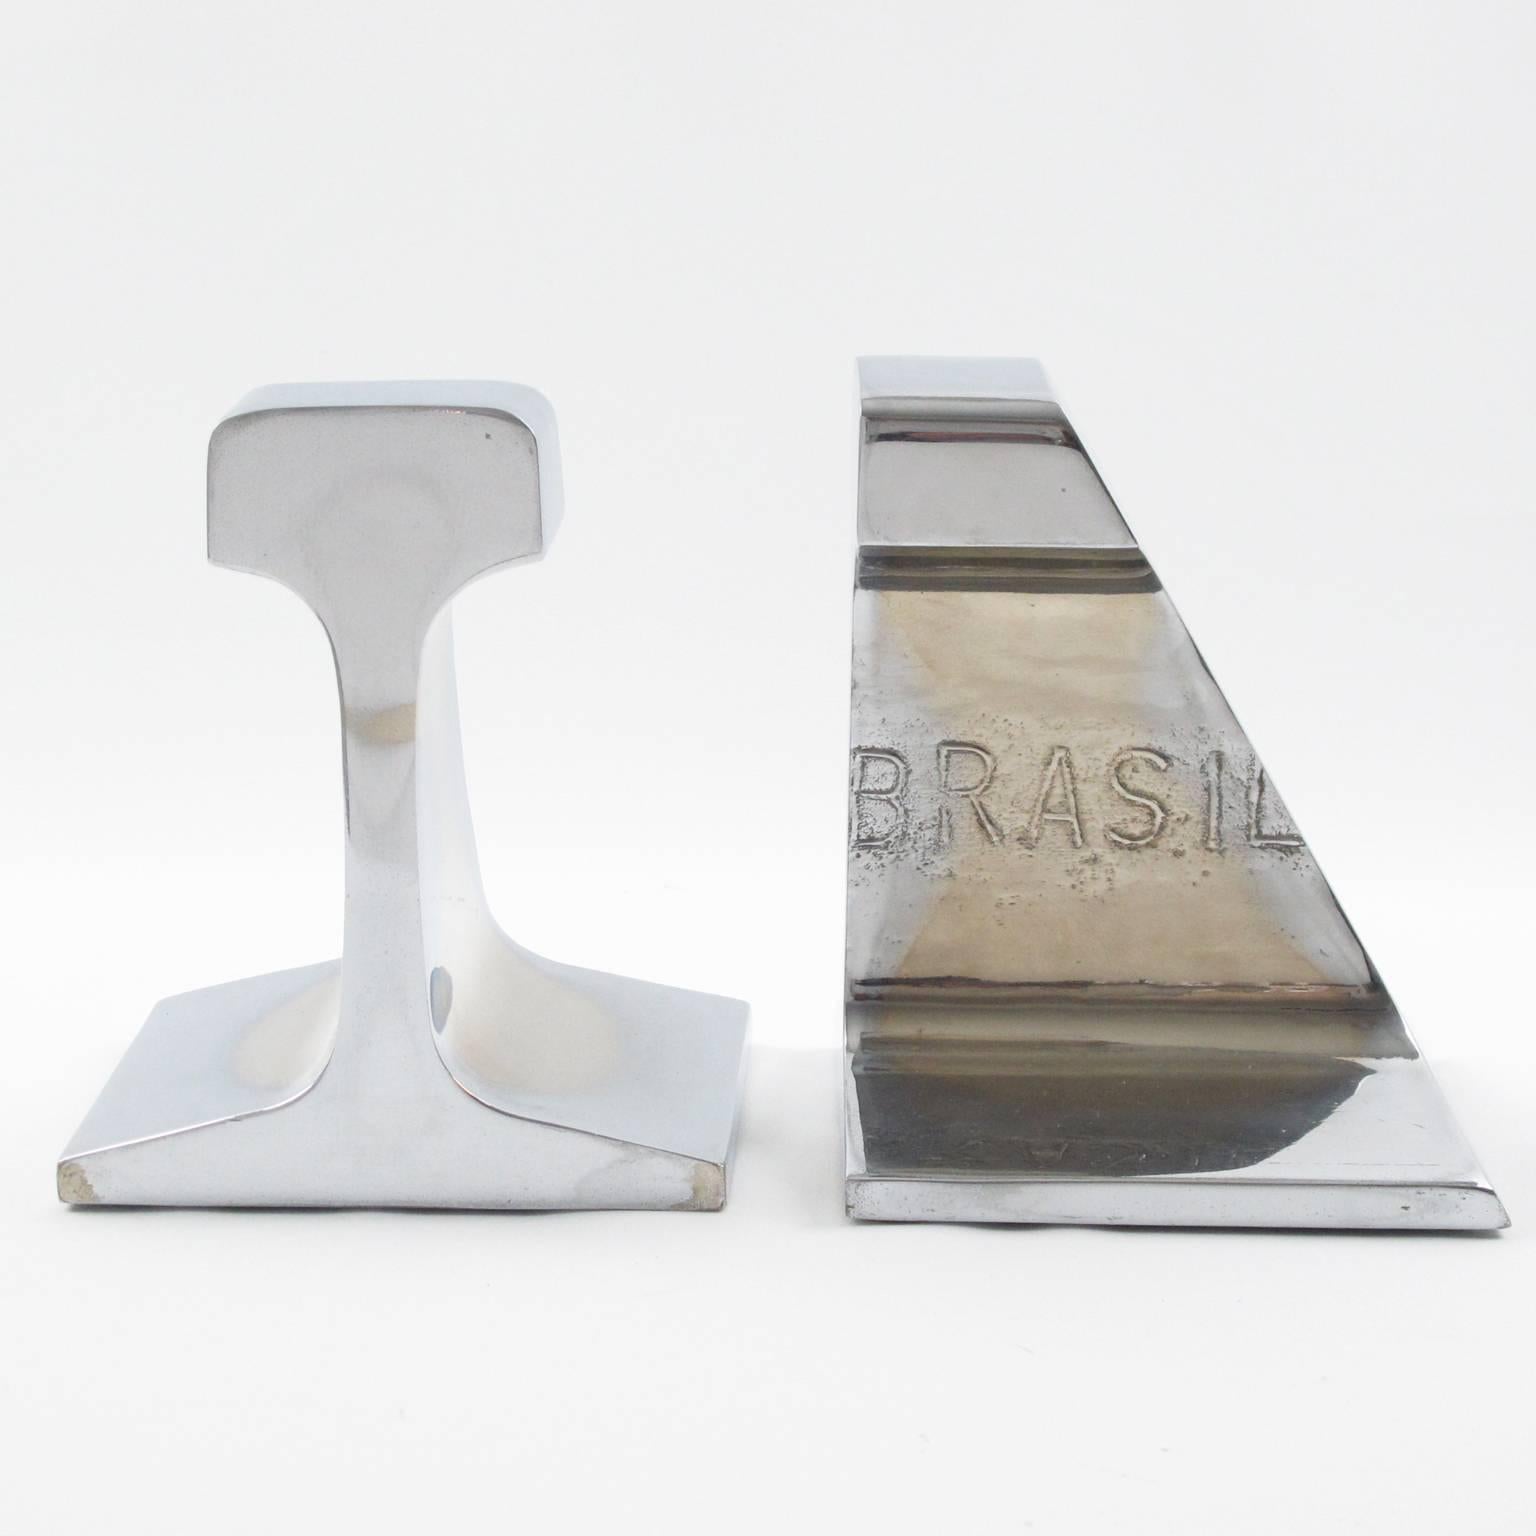 Brazilian Industrial Stainless Steel Pair of Bookends Railroad Rail Section CSN Brasil